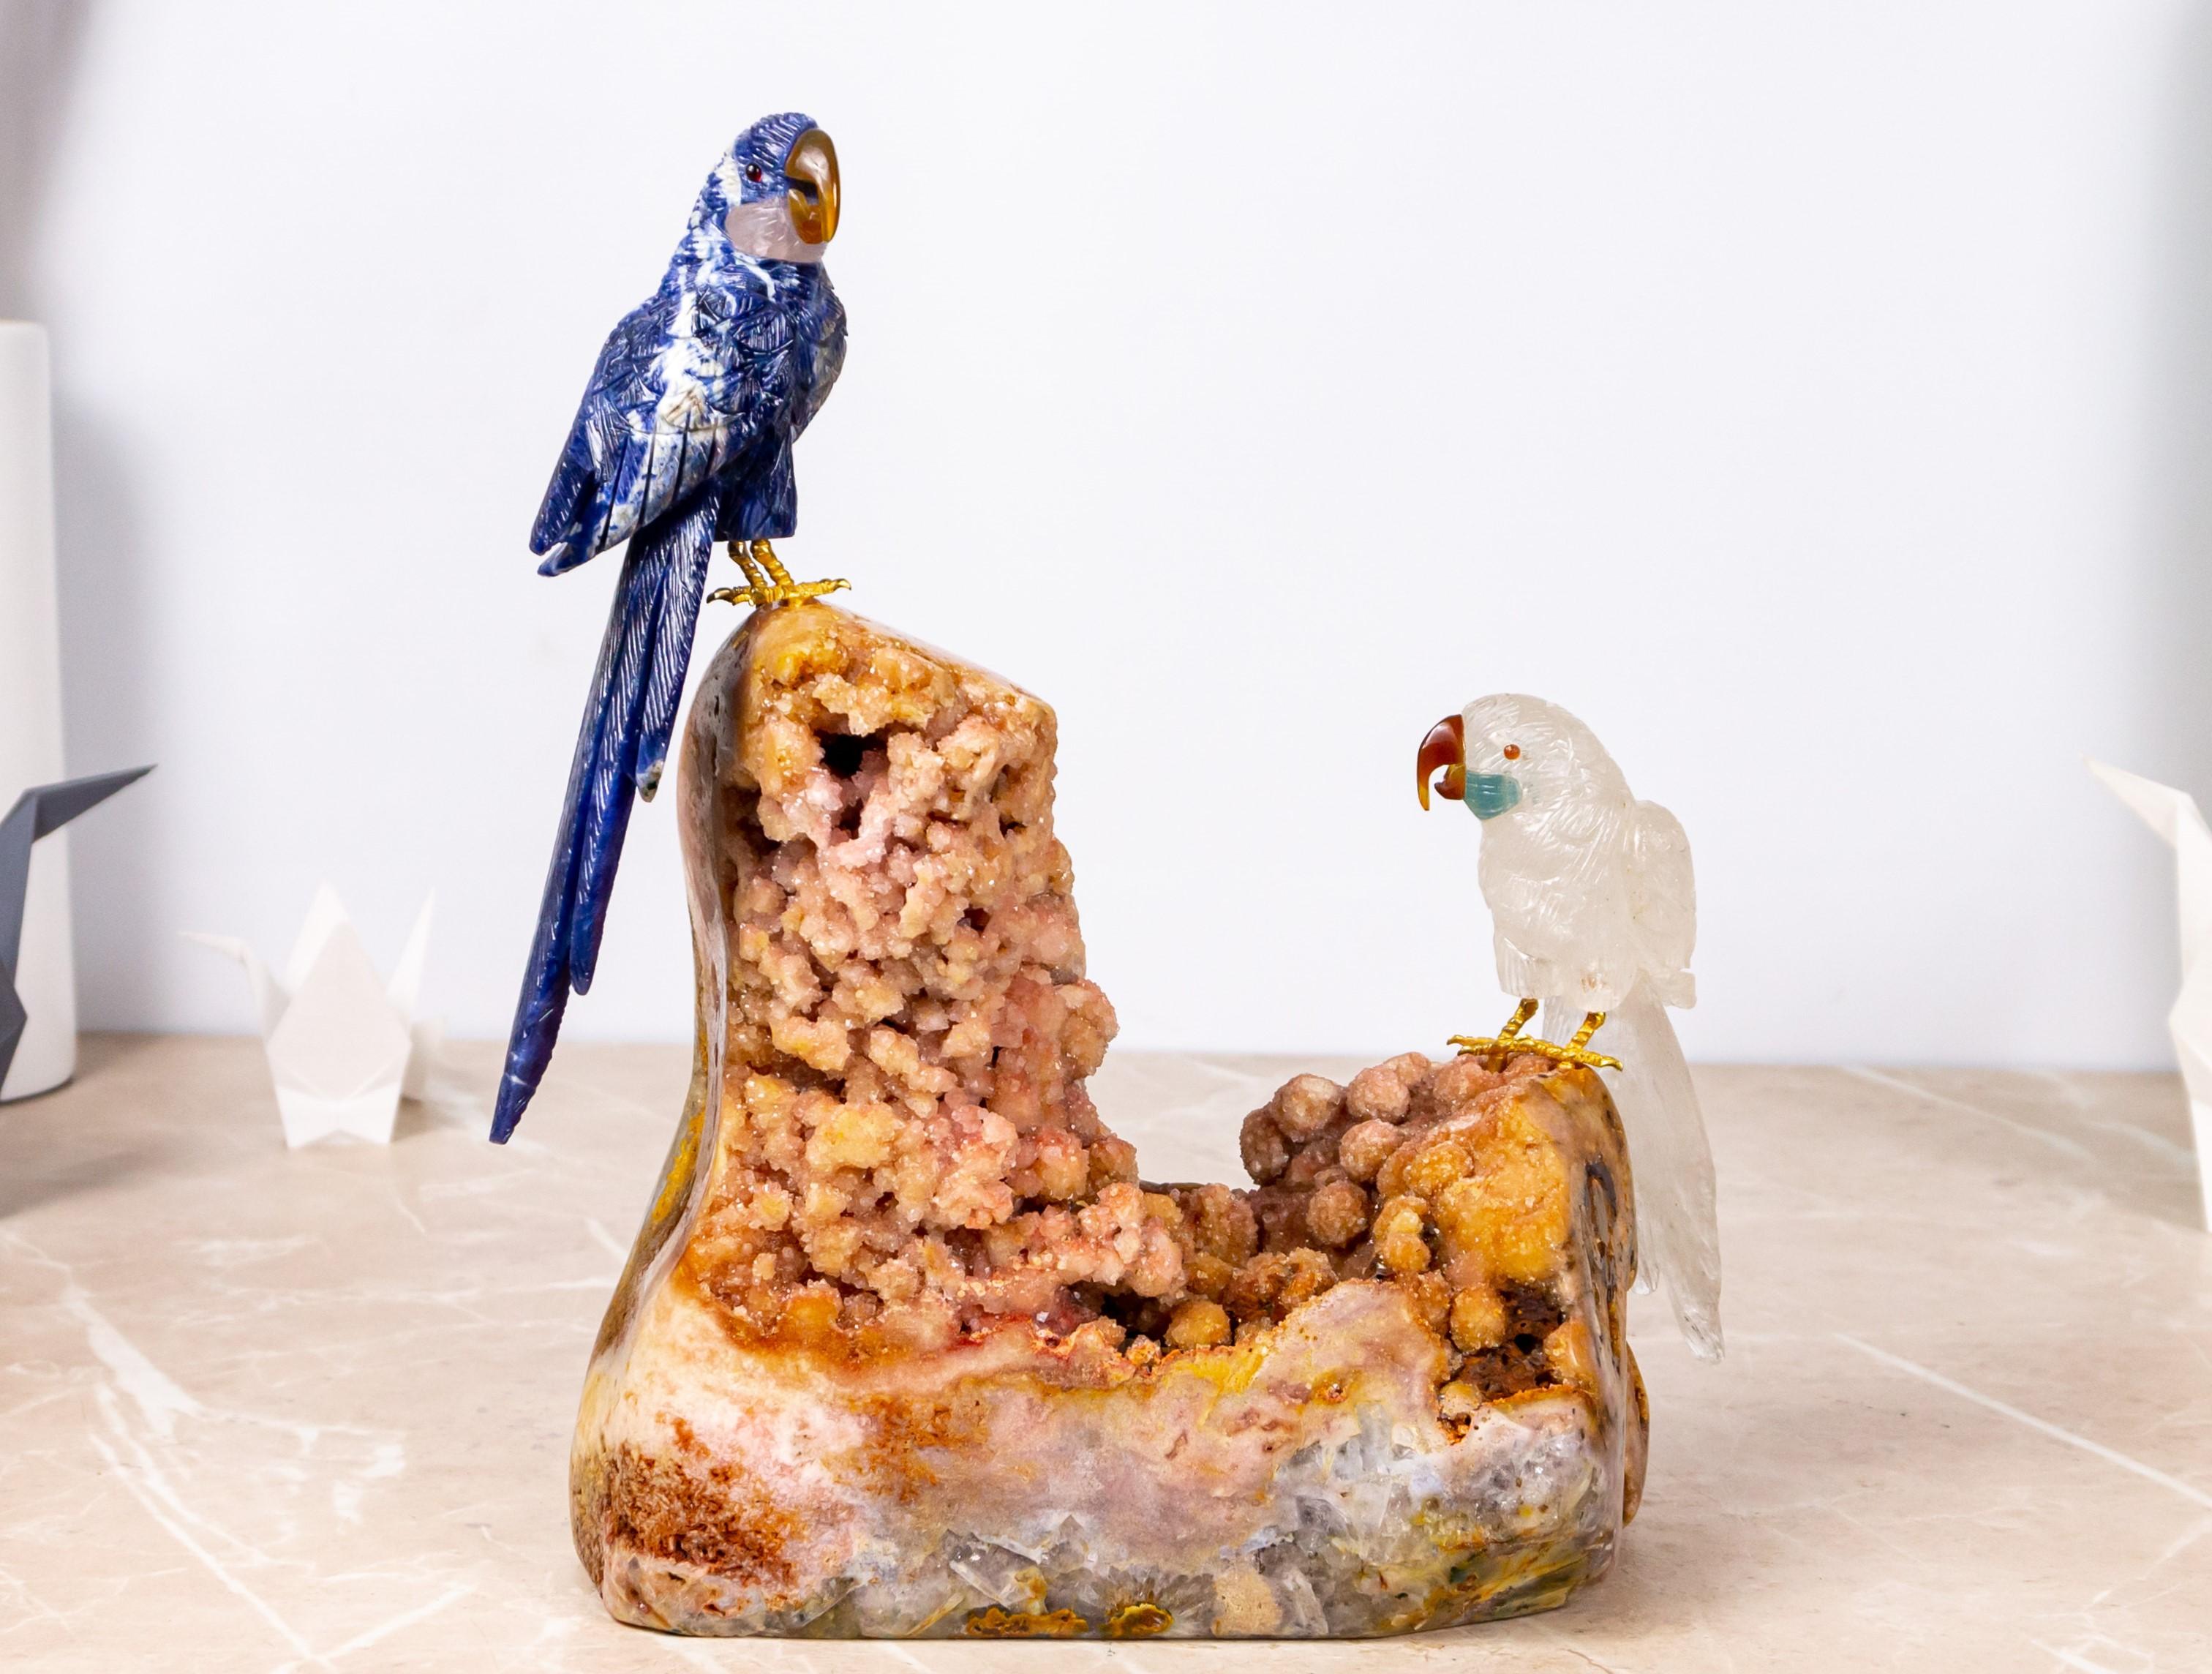 Depicting a charming couple of parrots, this piece by the world-renowned carver Venturini draws inspiration from Brazilian fauna and is crafted exclusively from the finest Brazilian Blue Sodalite and Rose Crystal Quartz. This artwork will surely